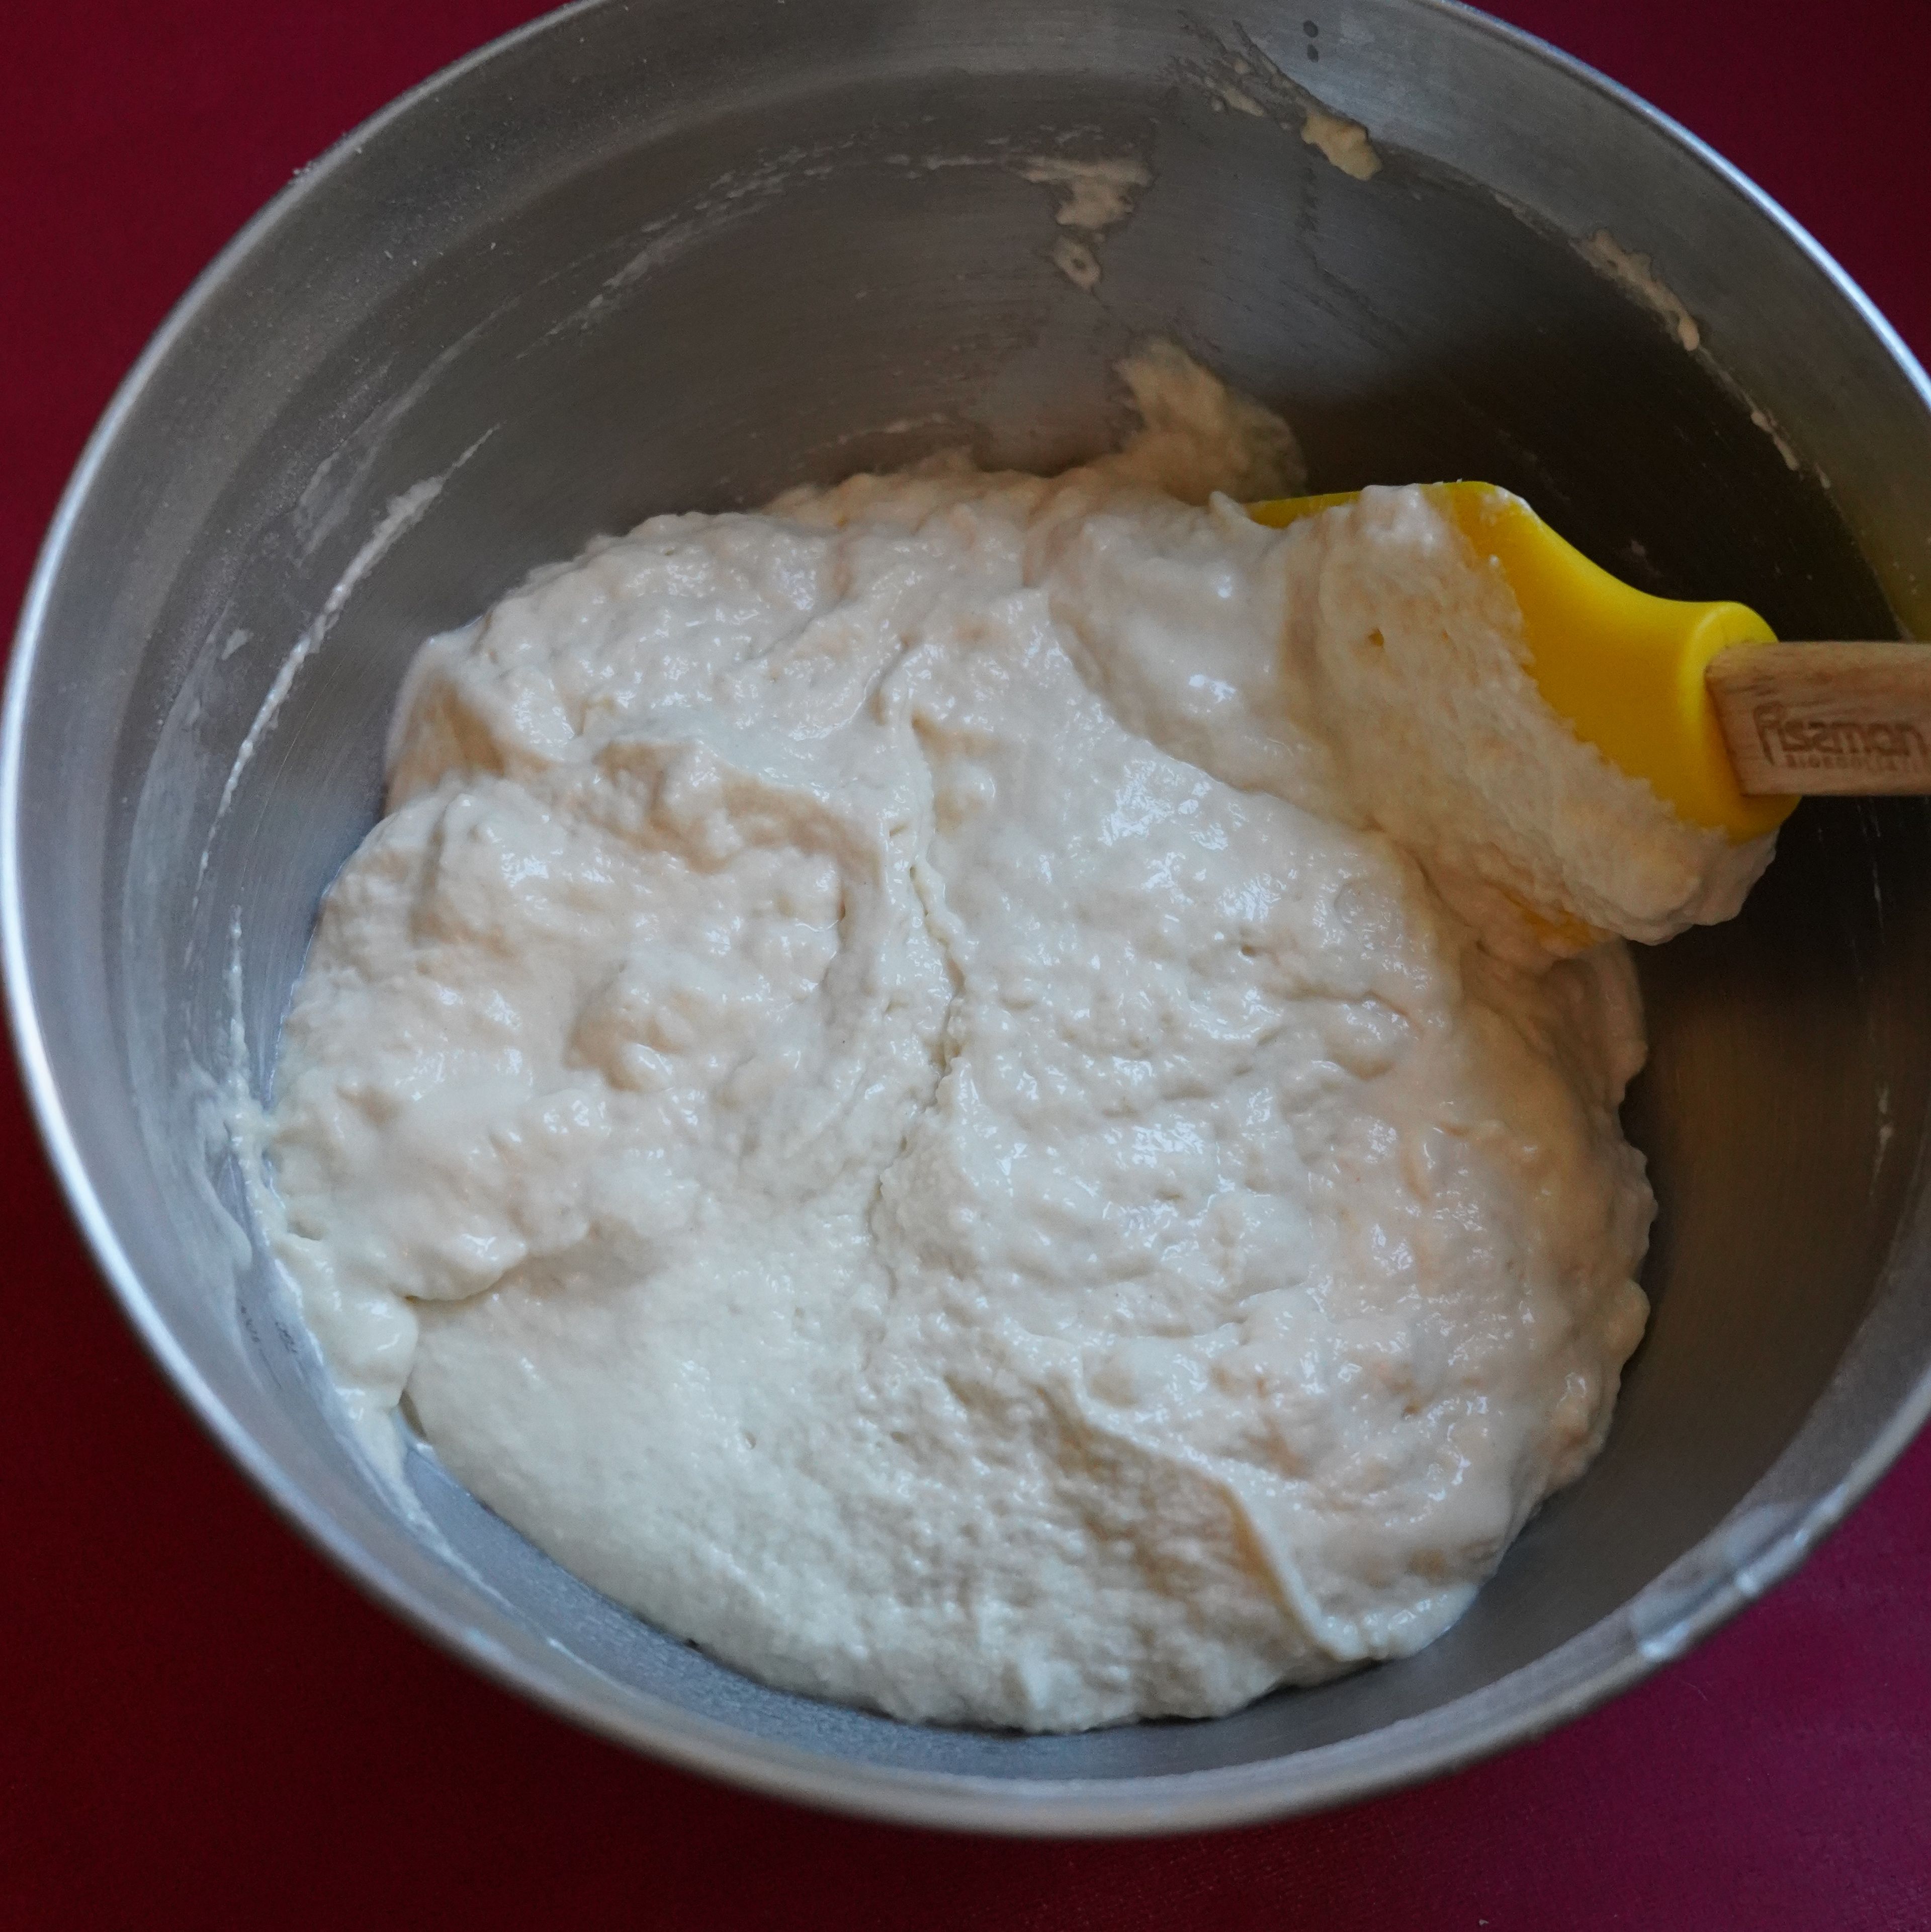 Fold the dry ingredients into the wet mixture, add the coconut oil and mix with a spatula lightly, just until combined.